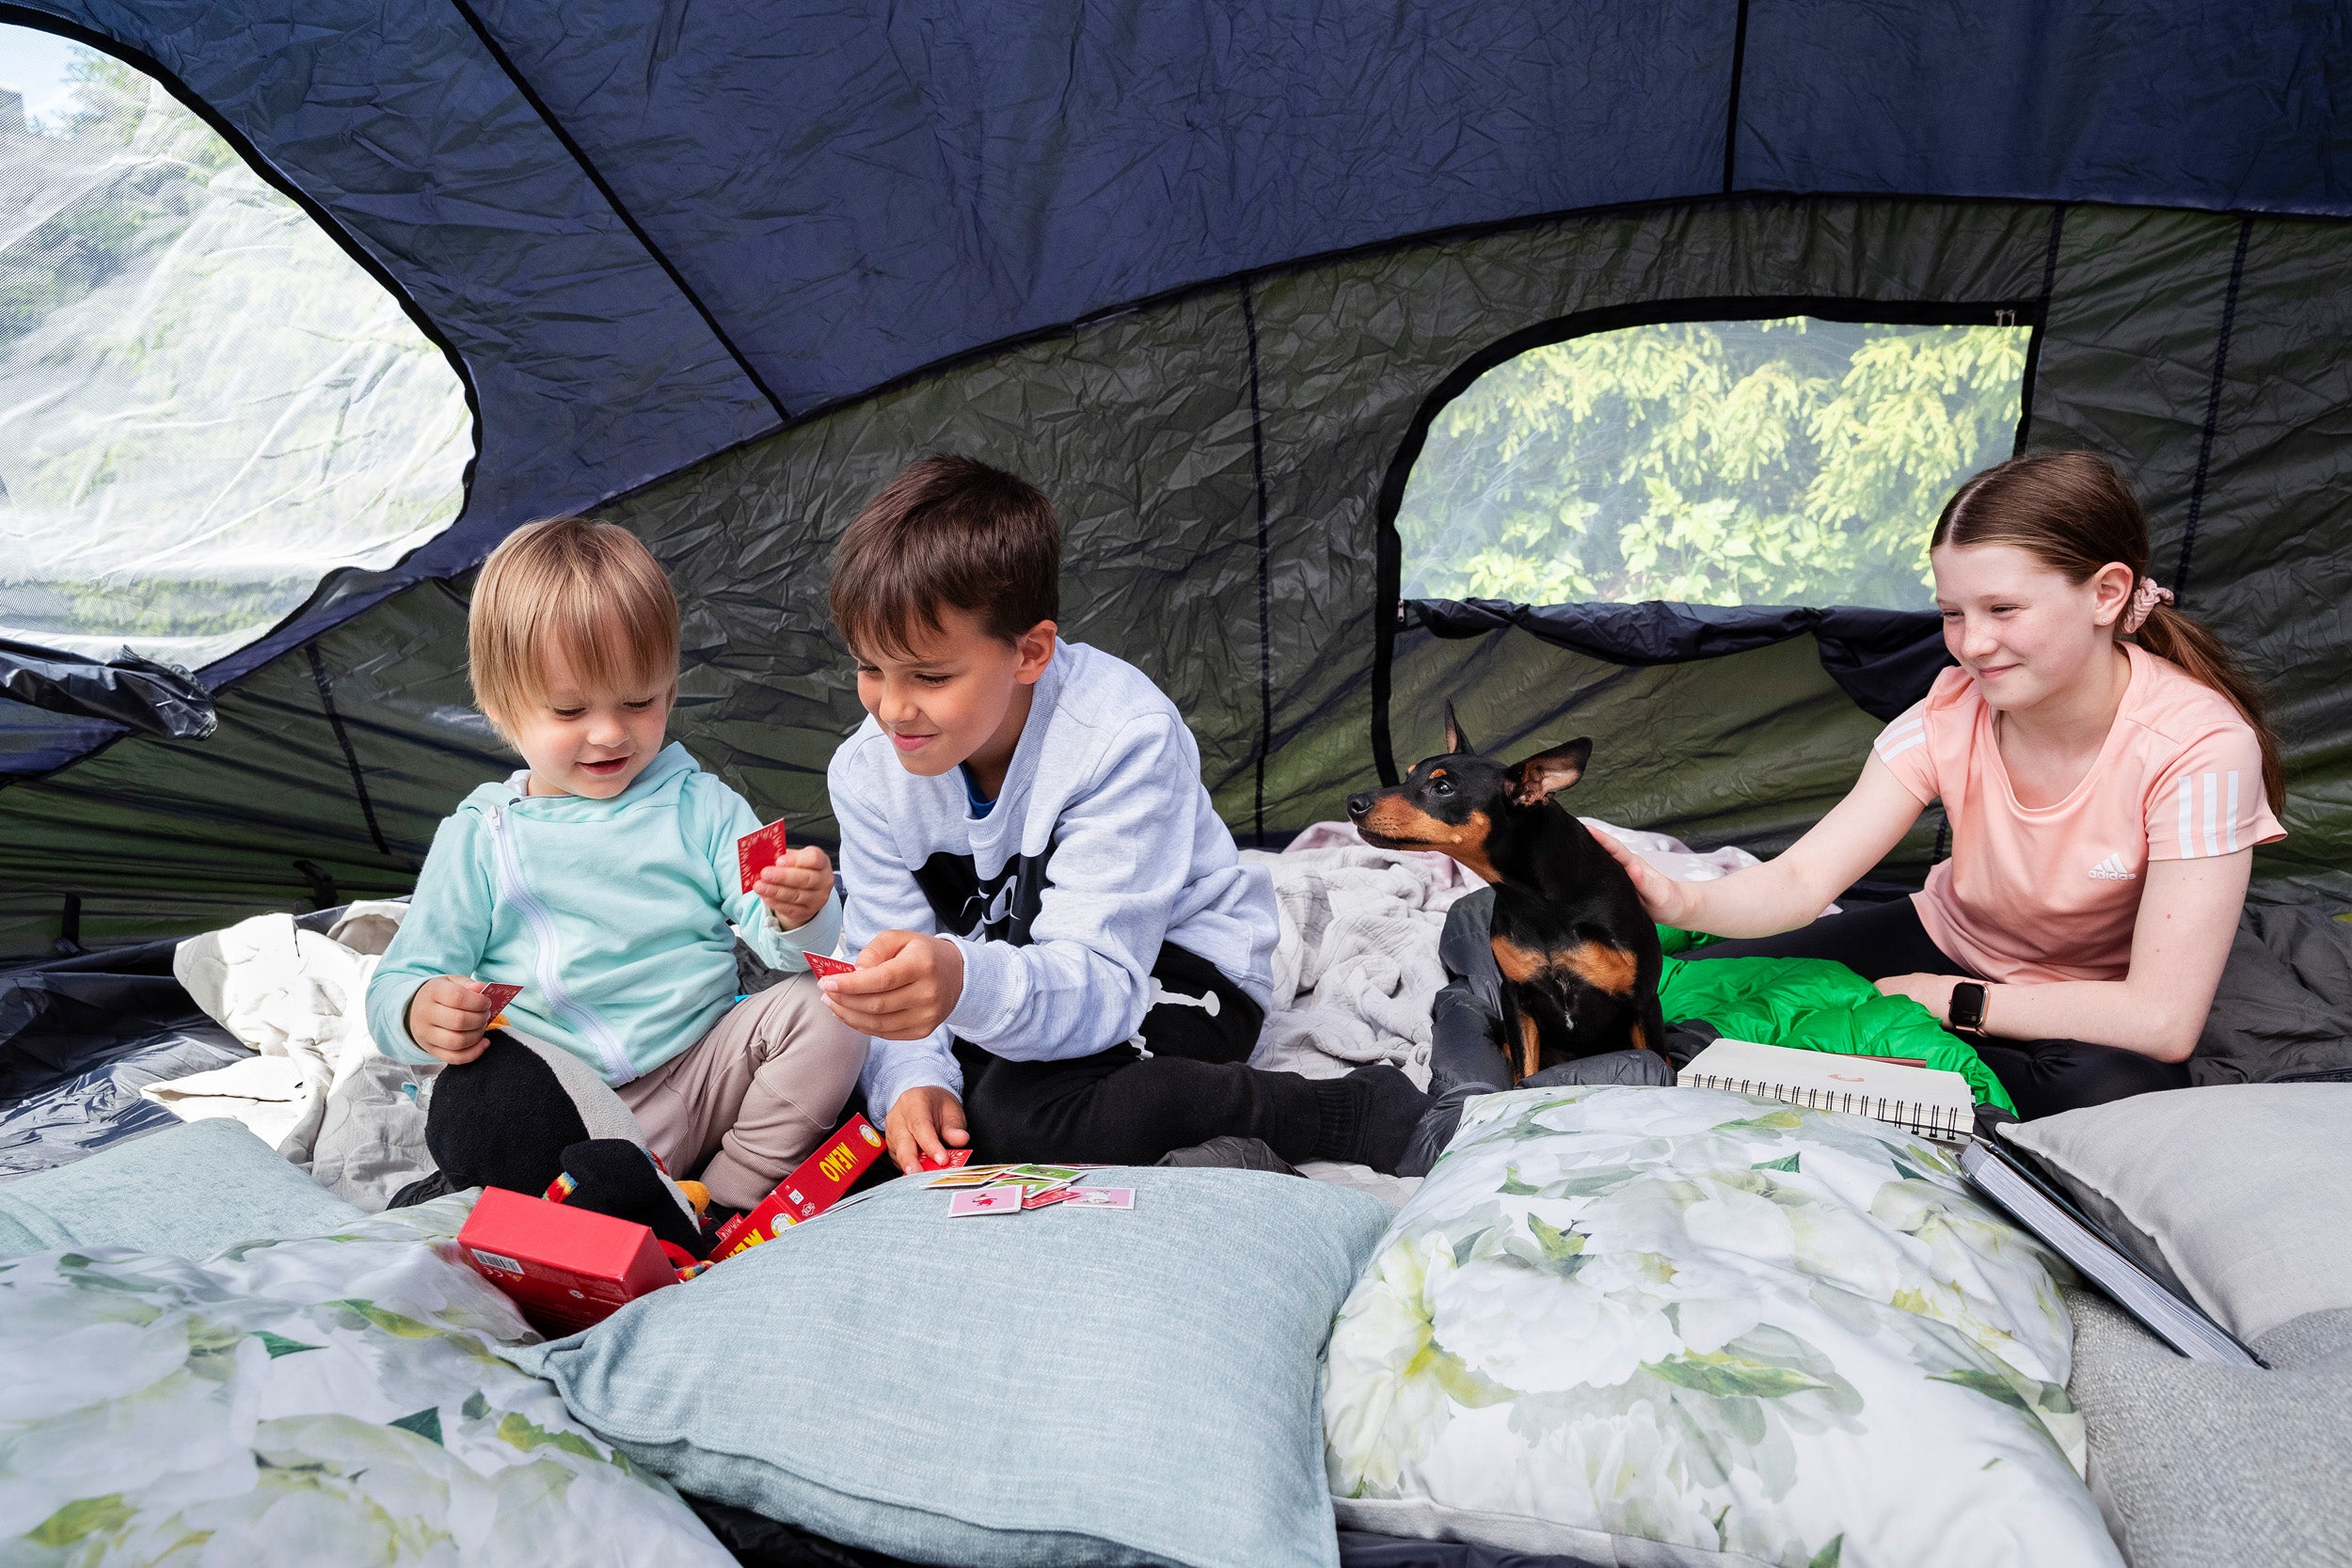 Kids playing inside a tent